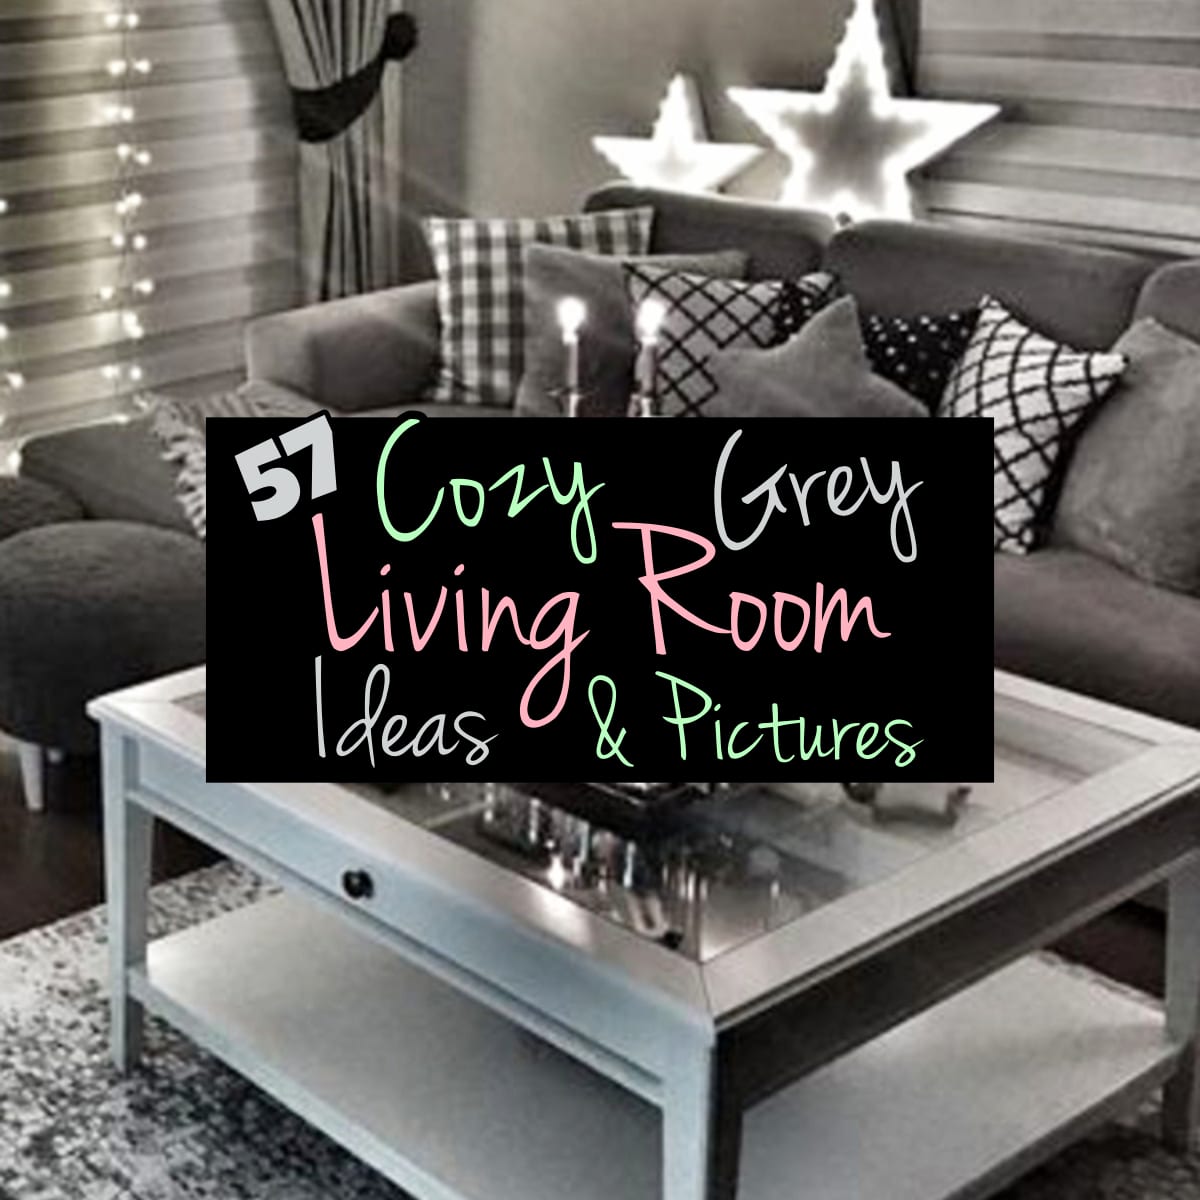 cozy grey living room ideas - pictures of small gray living rooms decorated in warm and cozy decor - grey and white living room ideas too